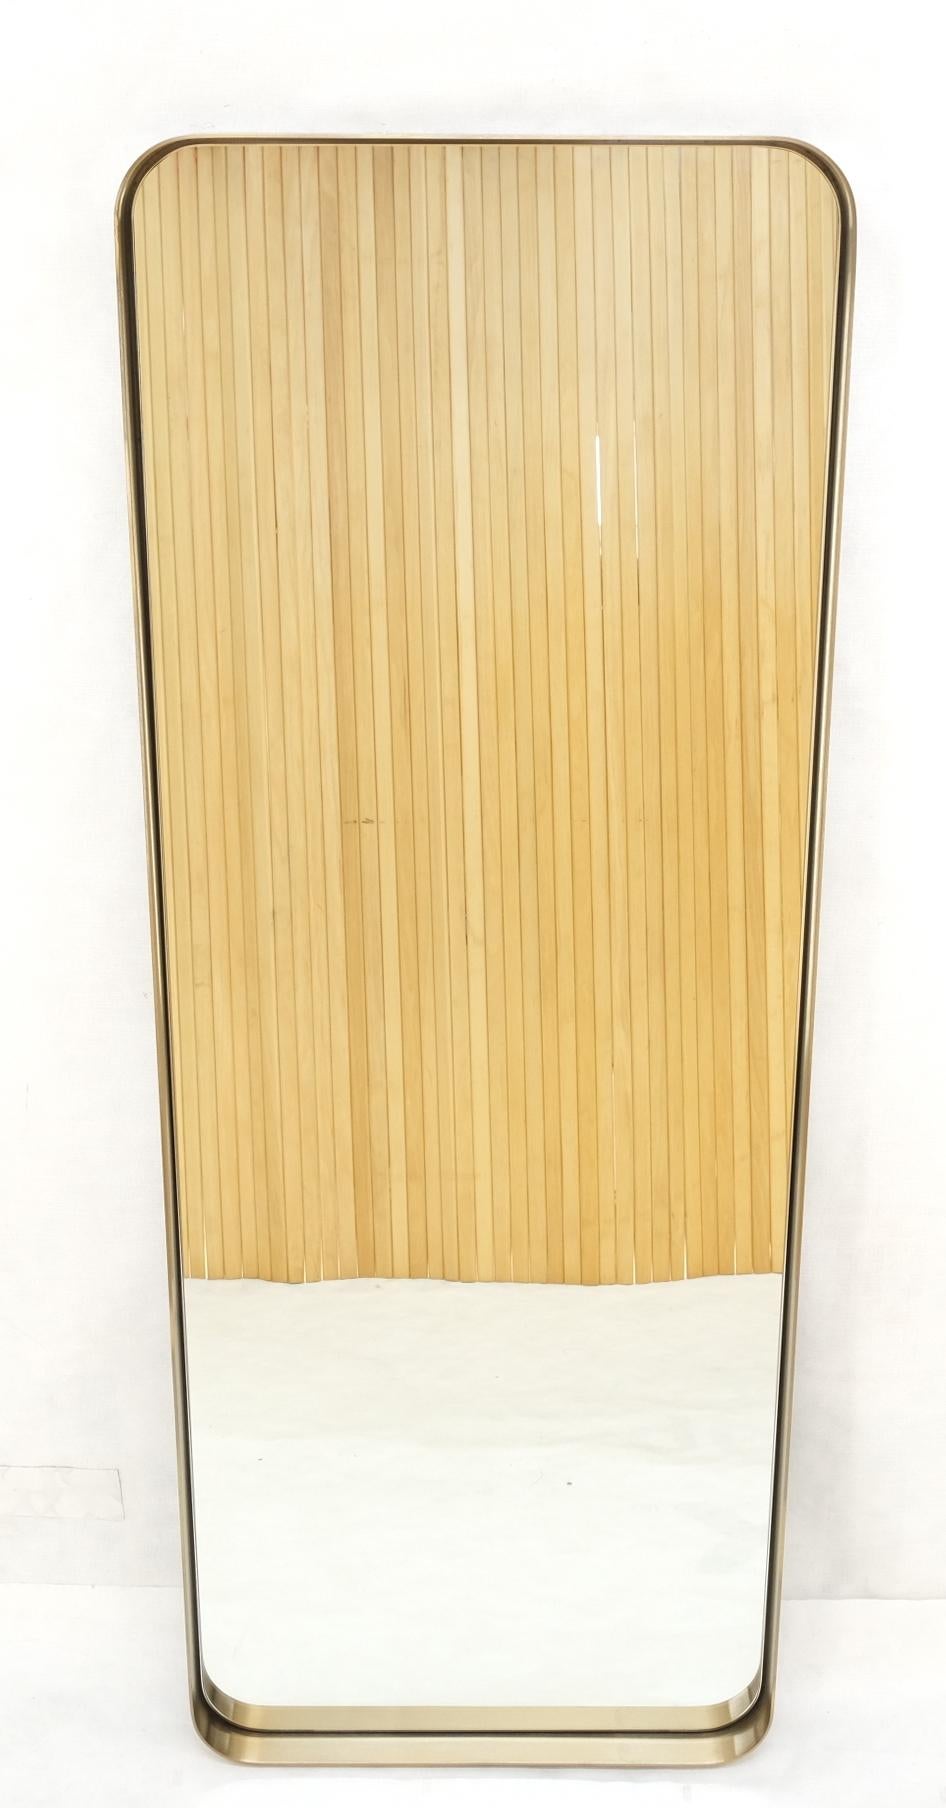 Bent Brushed Brass Frame Rounded Corners Mid Century Modern Wall Mirror Mint 6